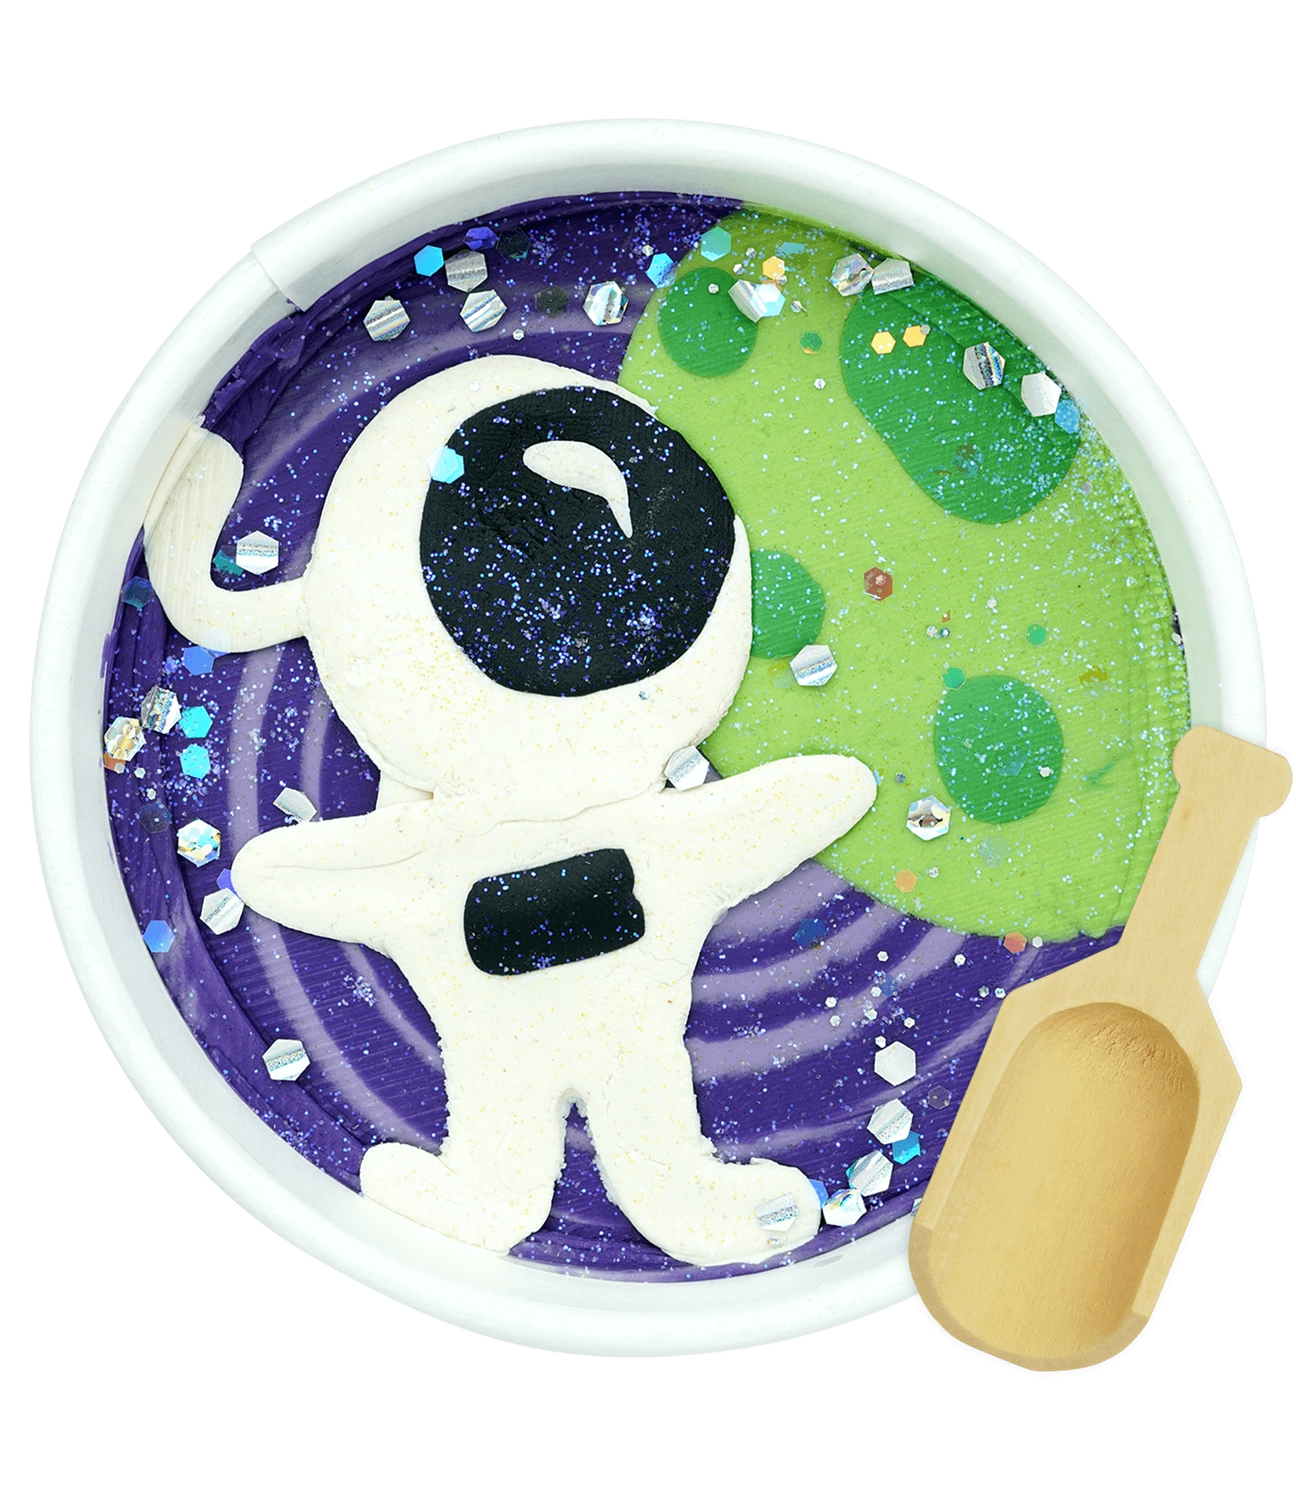 Land of Dough Moon Mission Luxe Play Dough